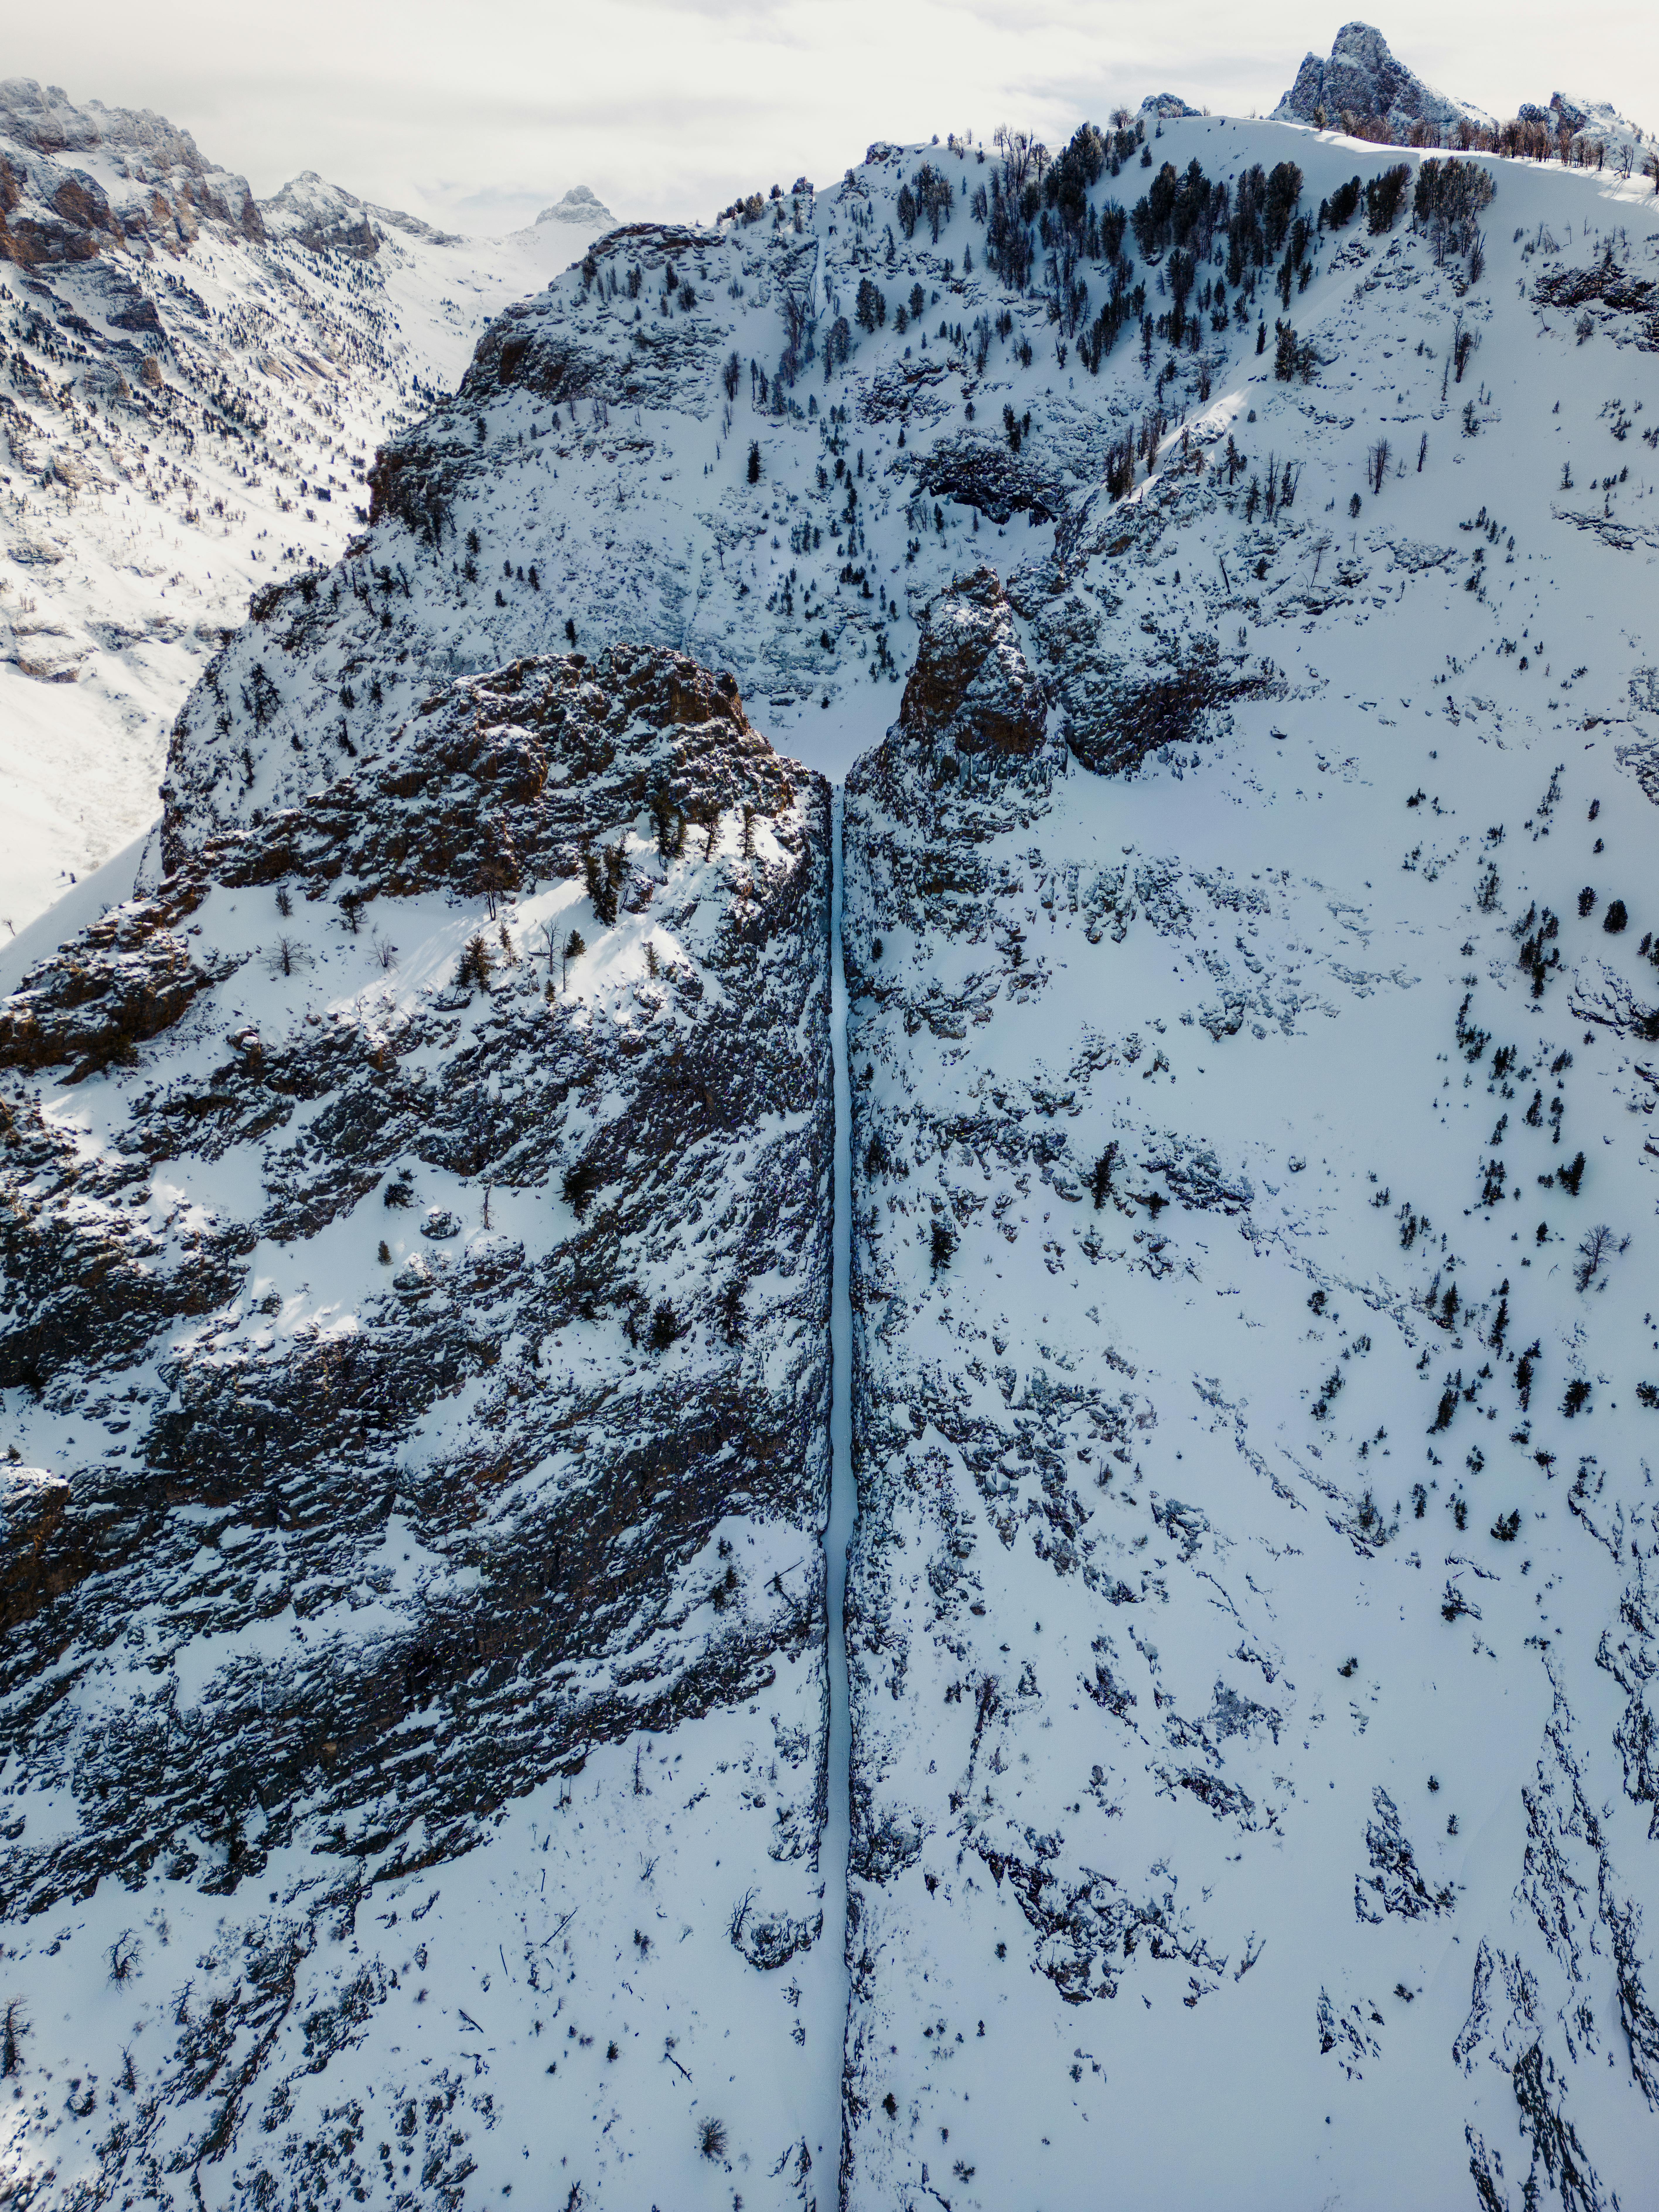 A photo of a dramatic mountain couloir from above